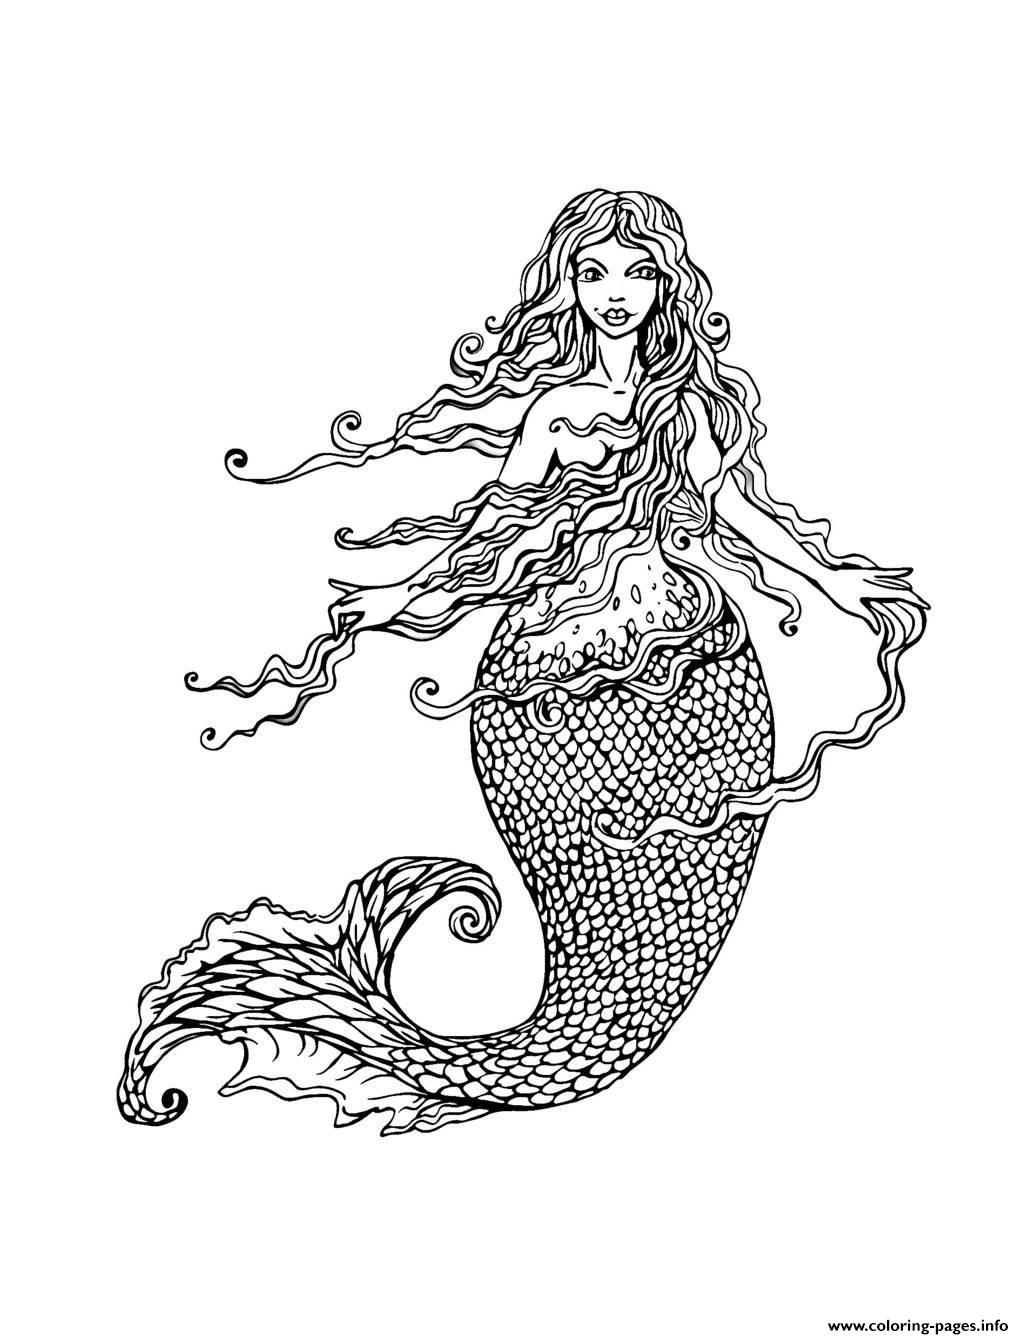 Adult Mermaid With Long Hair By Lian2011 coloring